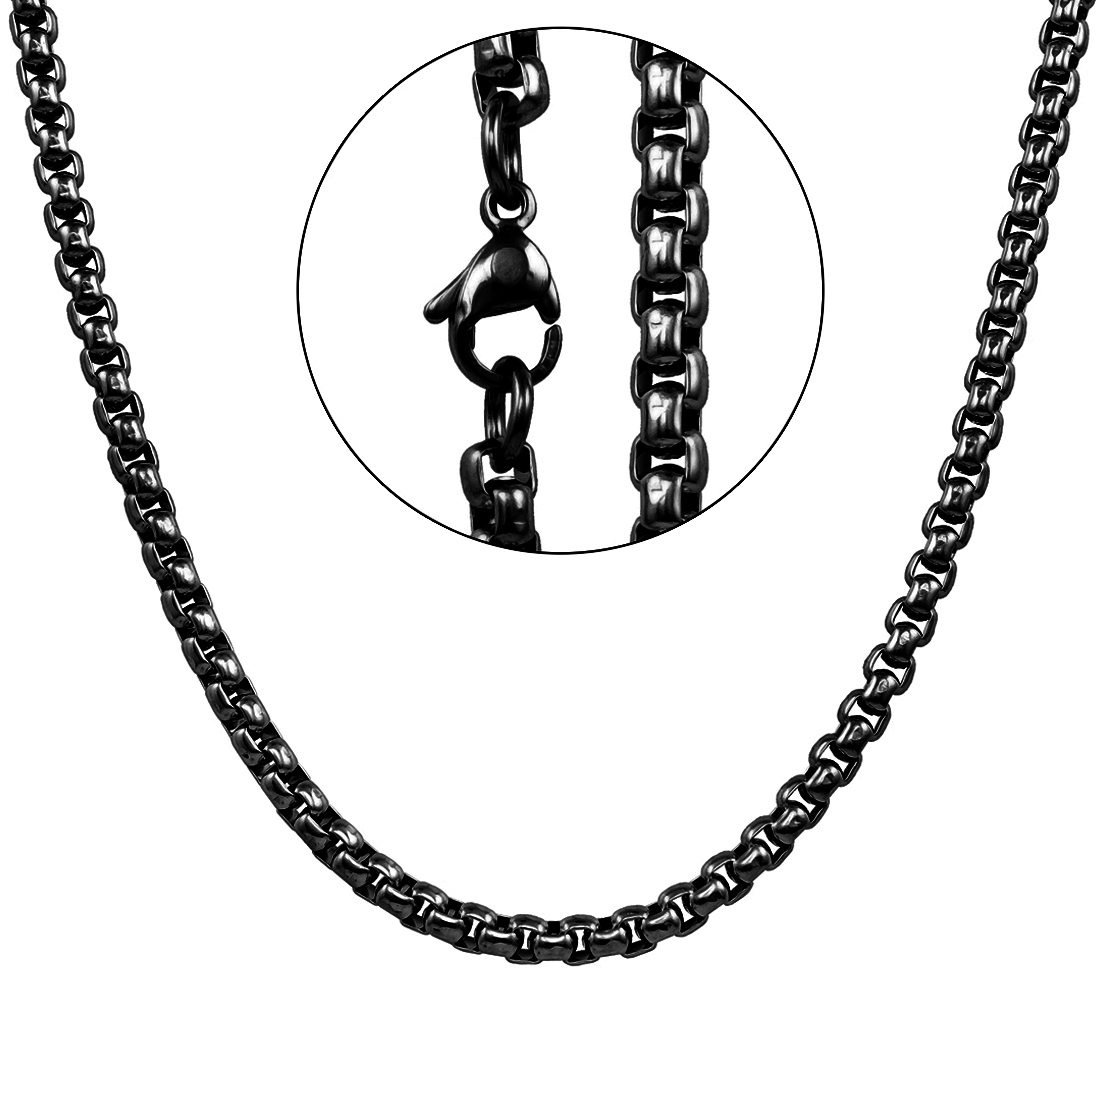 Jewelry Necklace Clipart Photo PNG Transparent Background, Free Download  #45141 - FreeIconsPNG